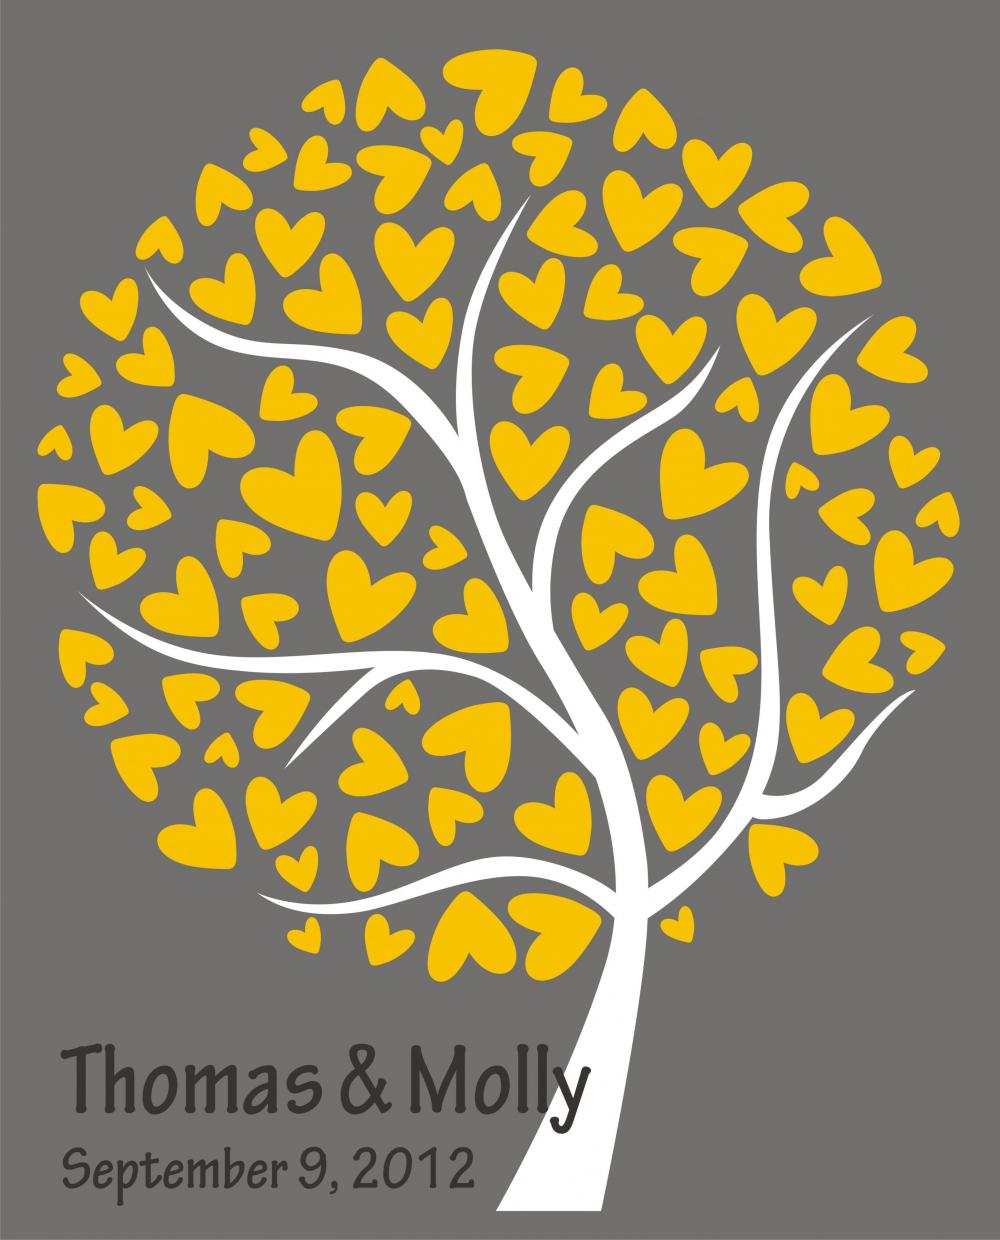 Custom Personalized Wedding Signature Tree 18x24 120 Signatures Guestbook Alternative Heart Tree Grey And Yellow